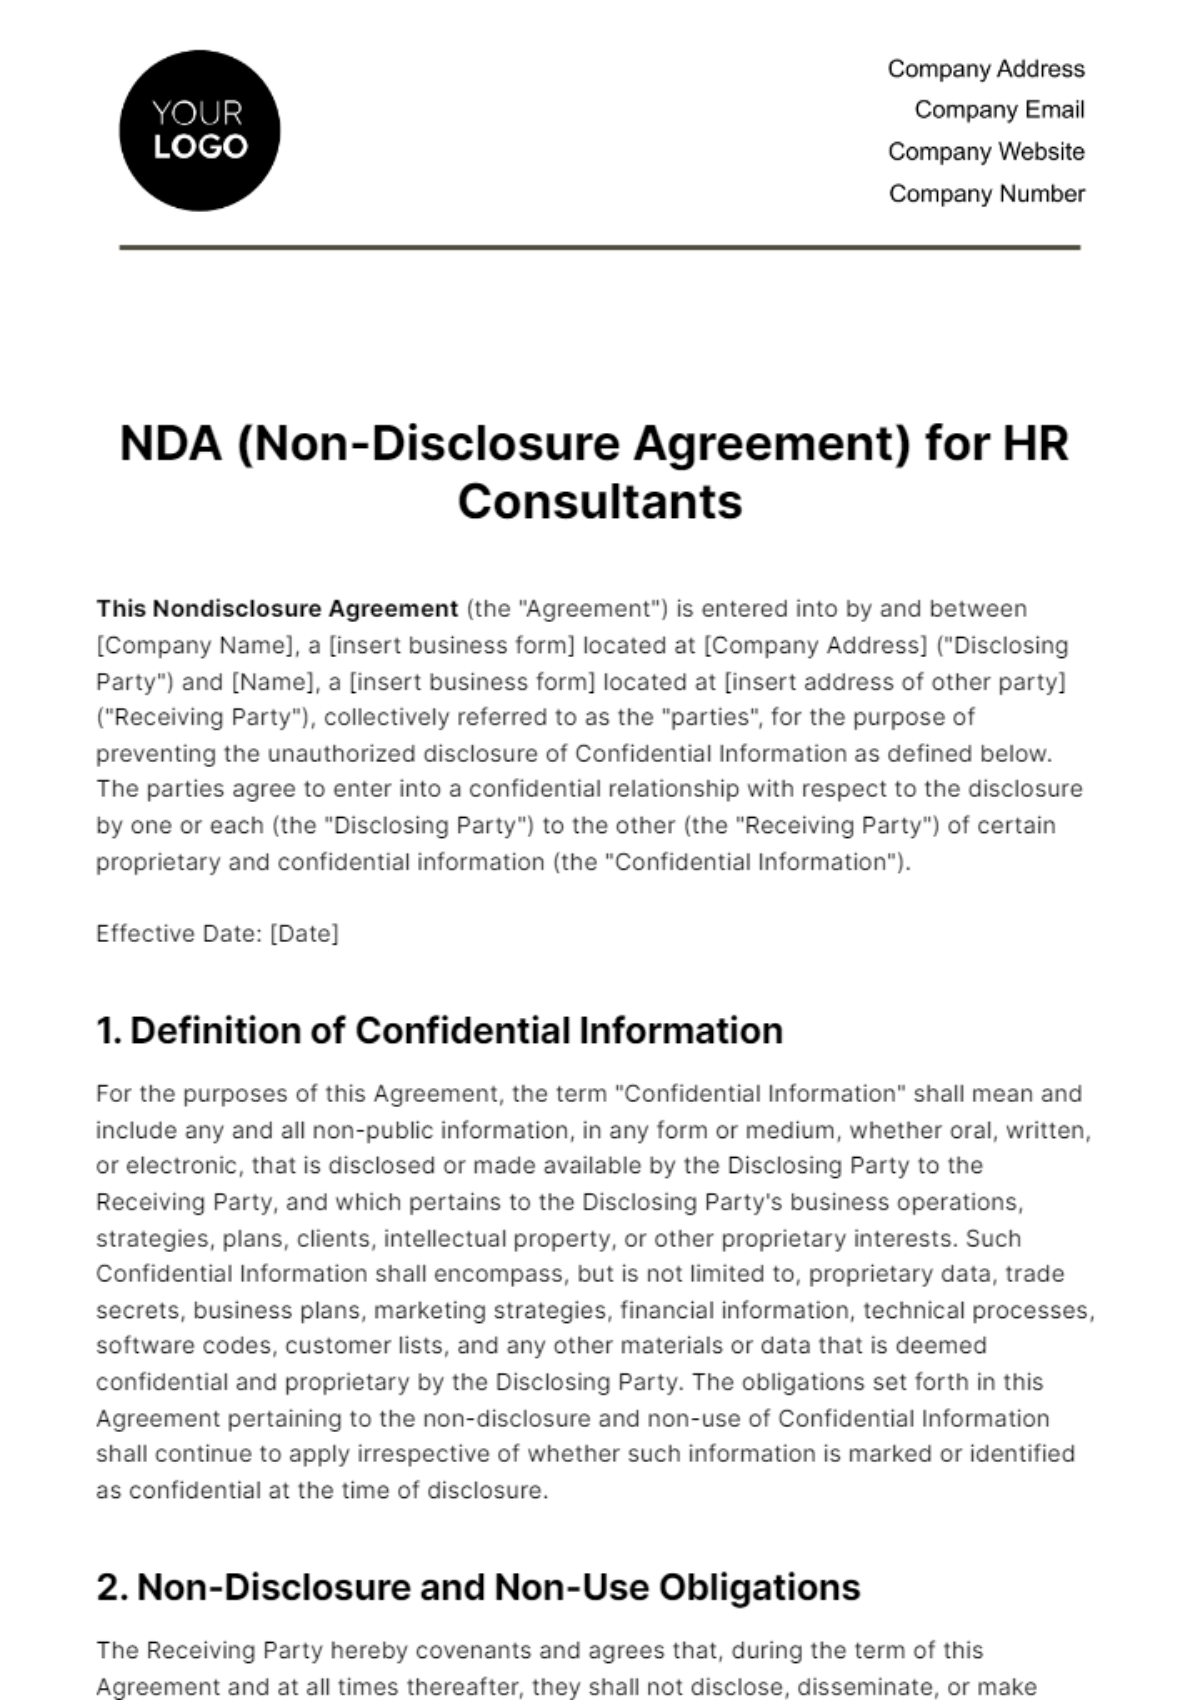 Free NDA (Non-Disclosure Agreement) for HR Consultants Template